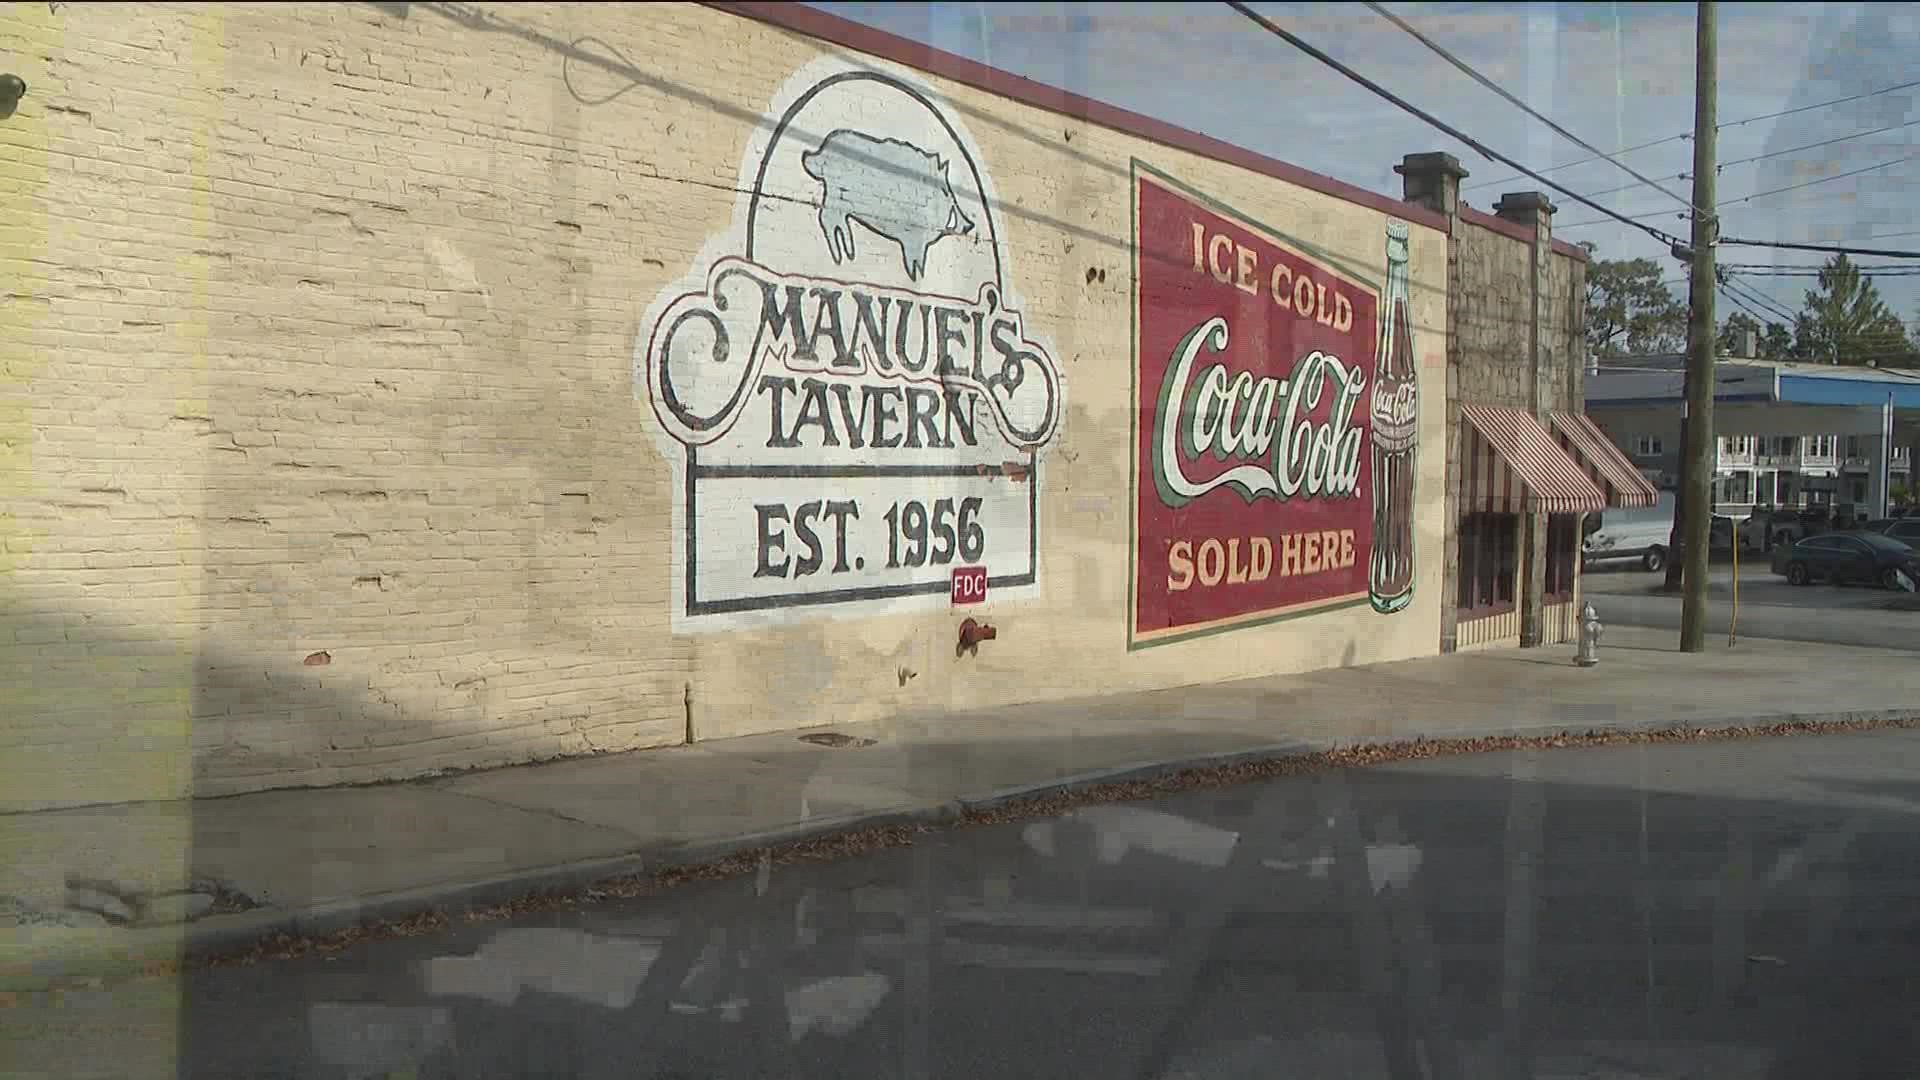 Police and the tavern's owner said the man was trying to stop someone from breaking into vehicles.